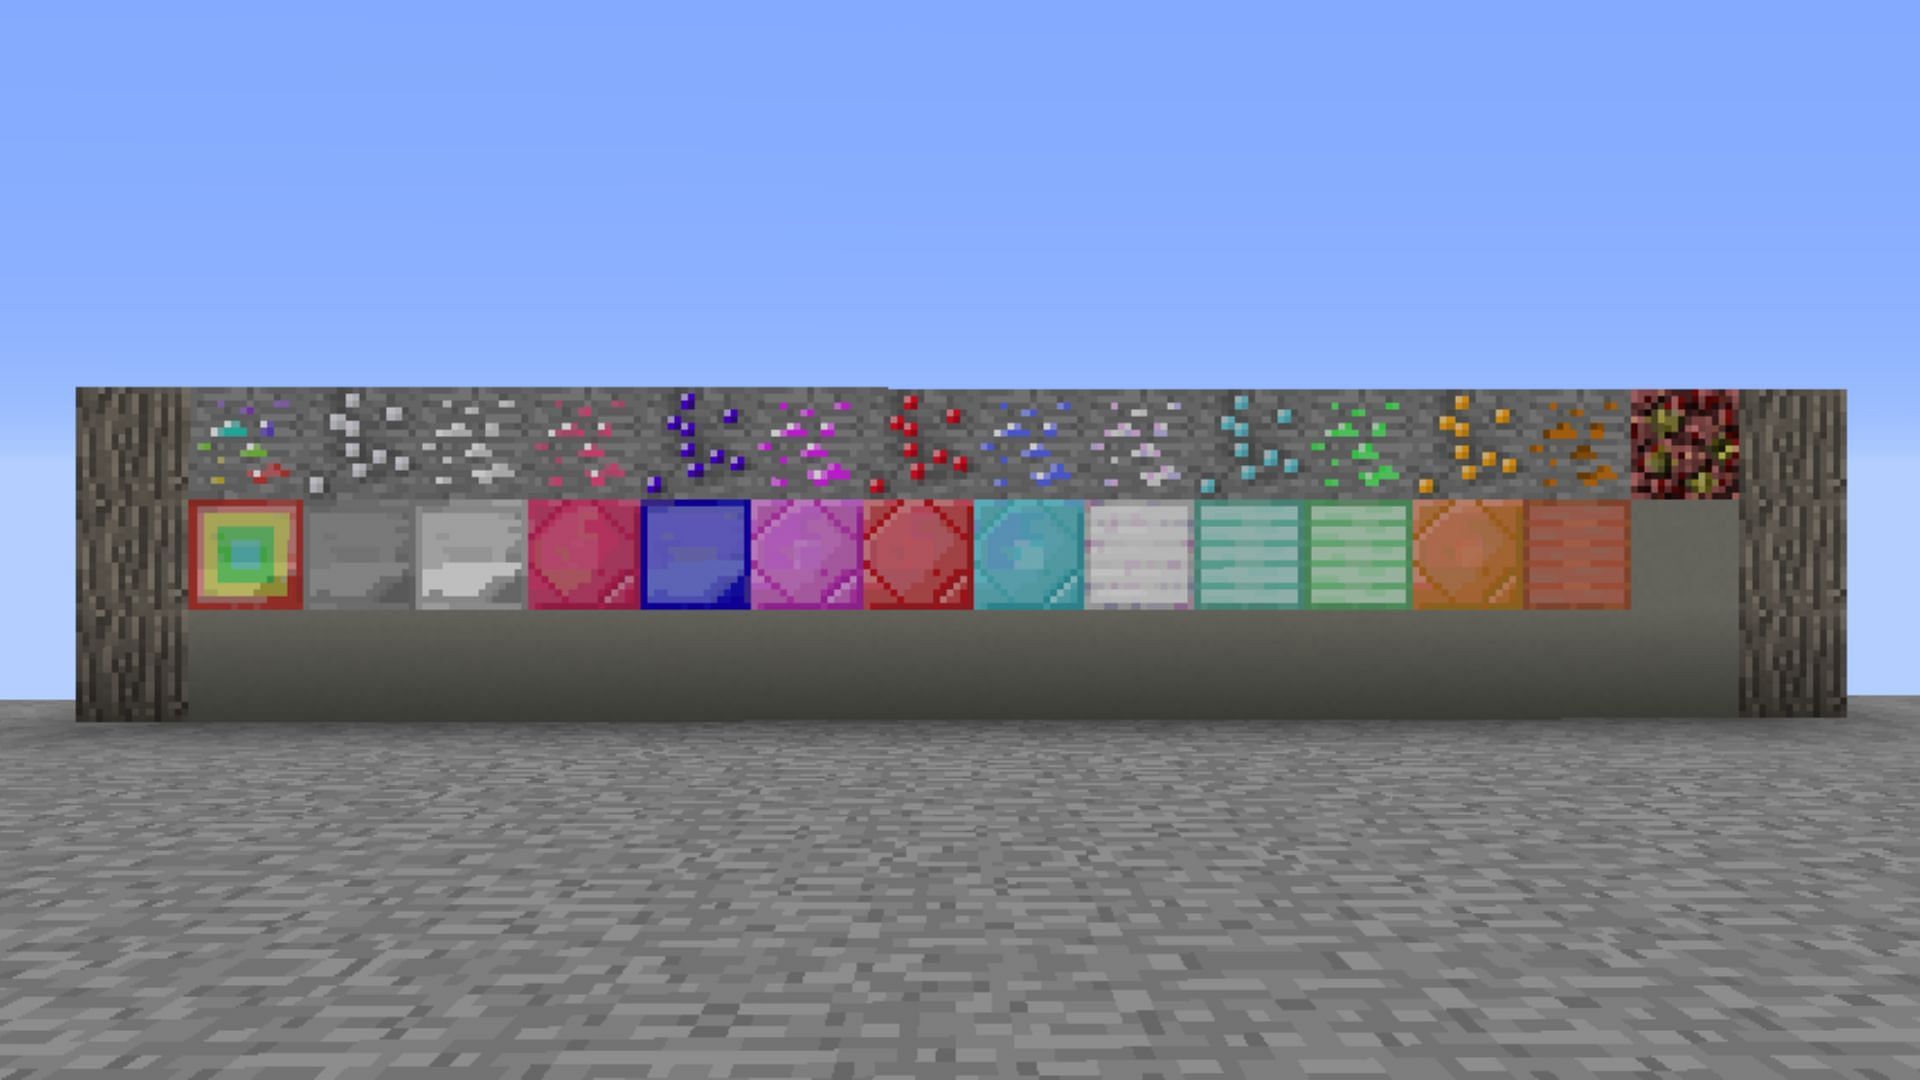 Extended items and ores